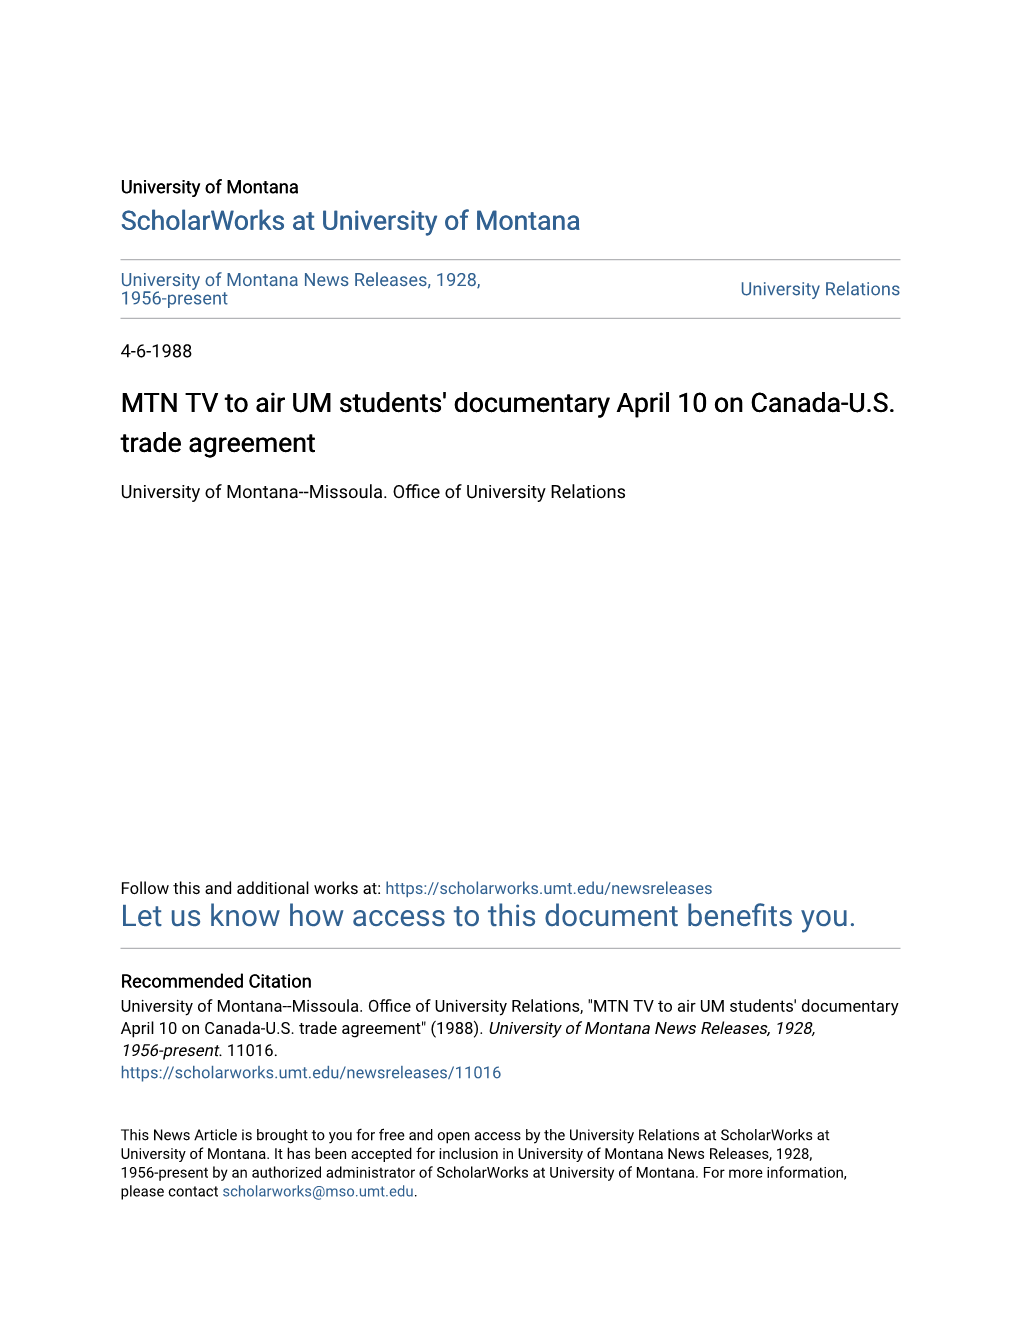 MTN TV to Air UM Students' Documentary April 10 on Canada-U.S